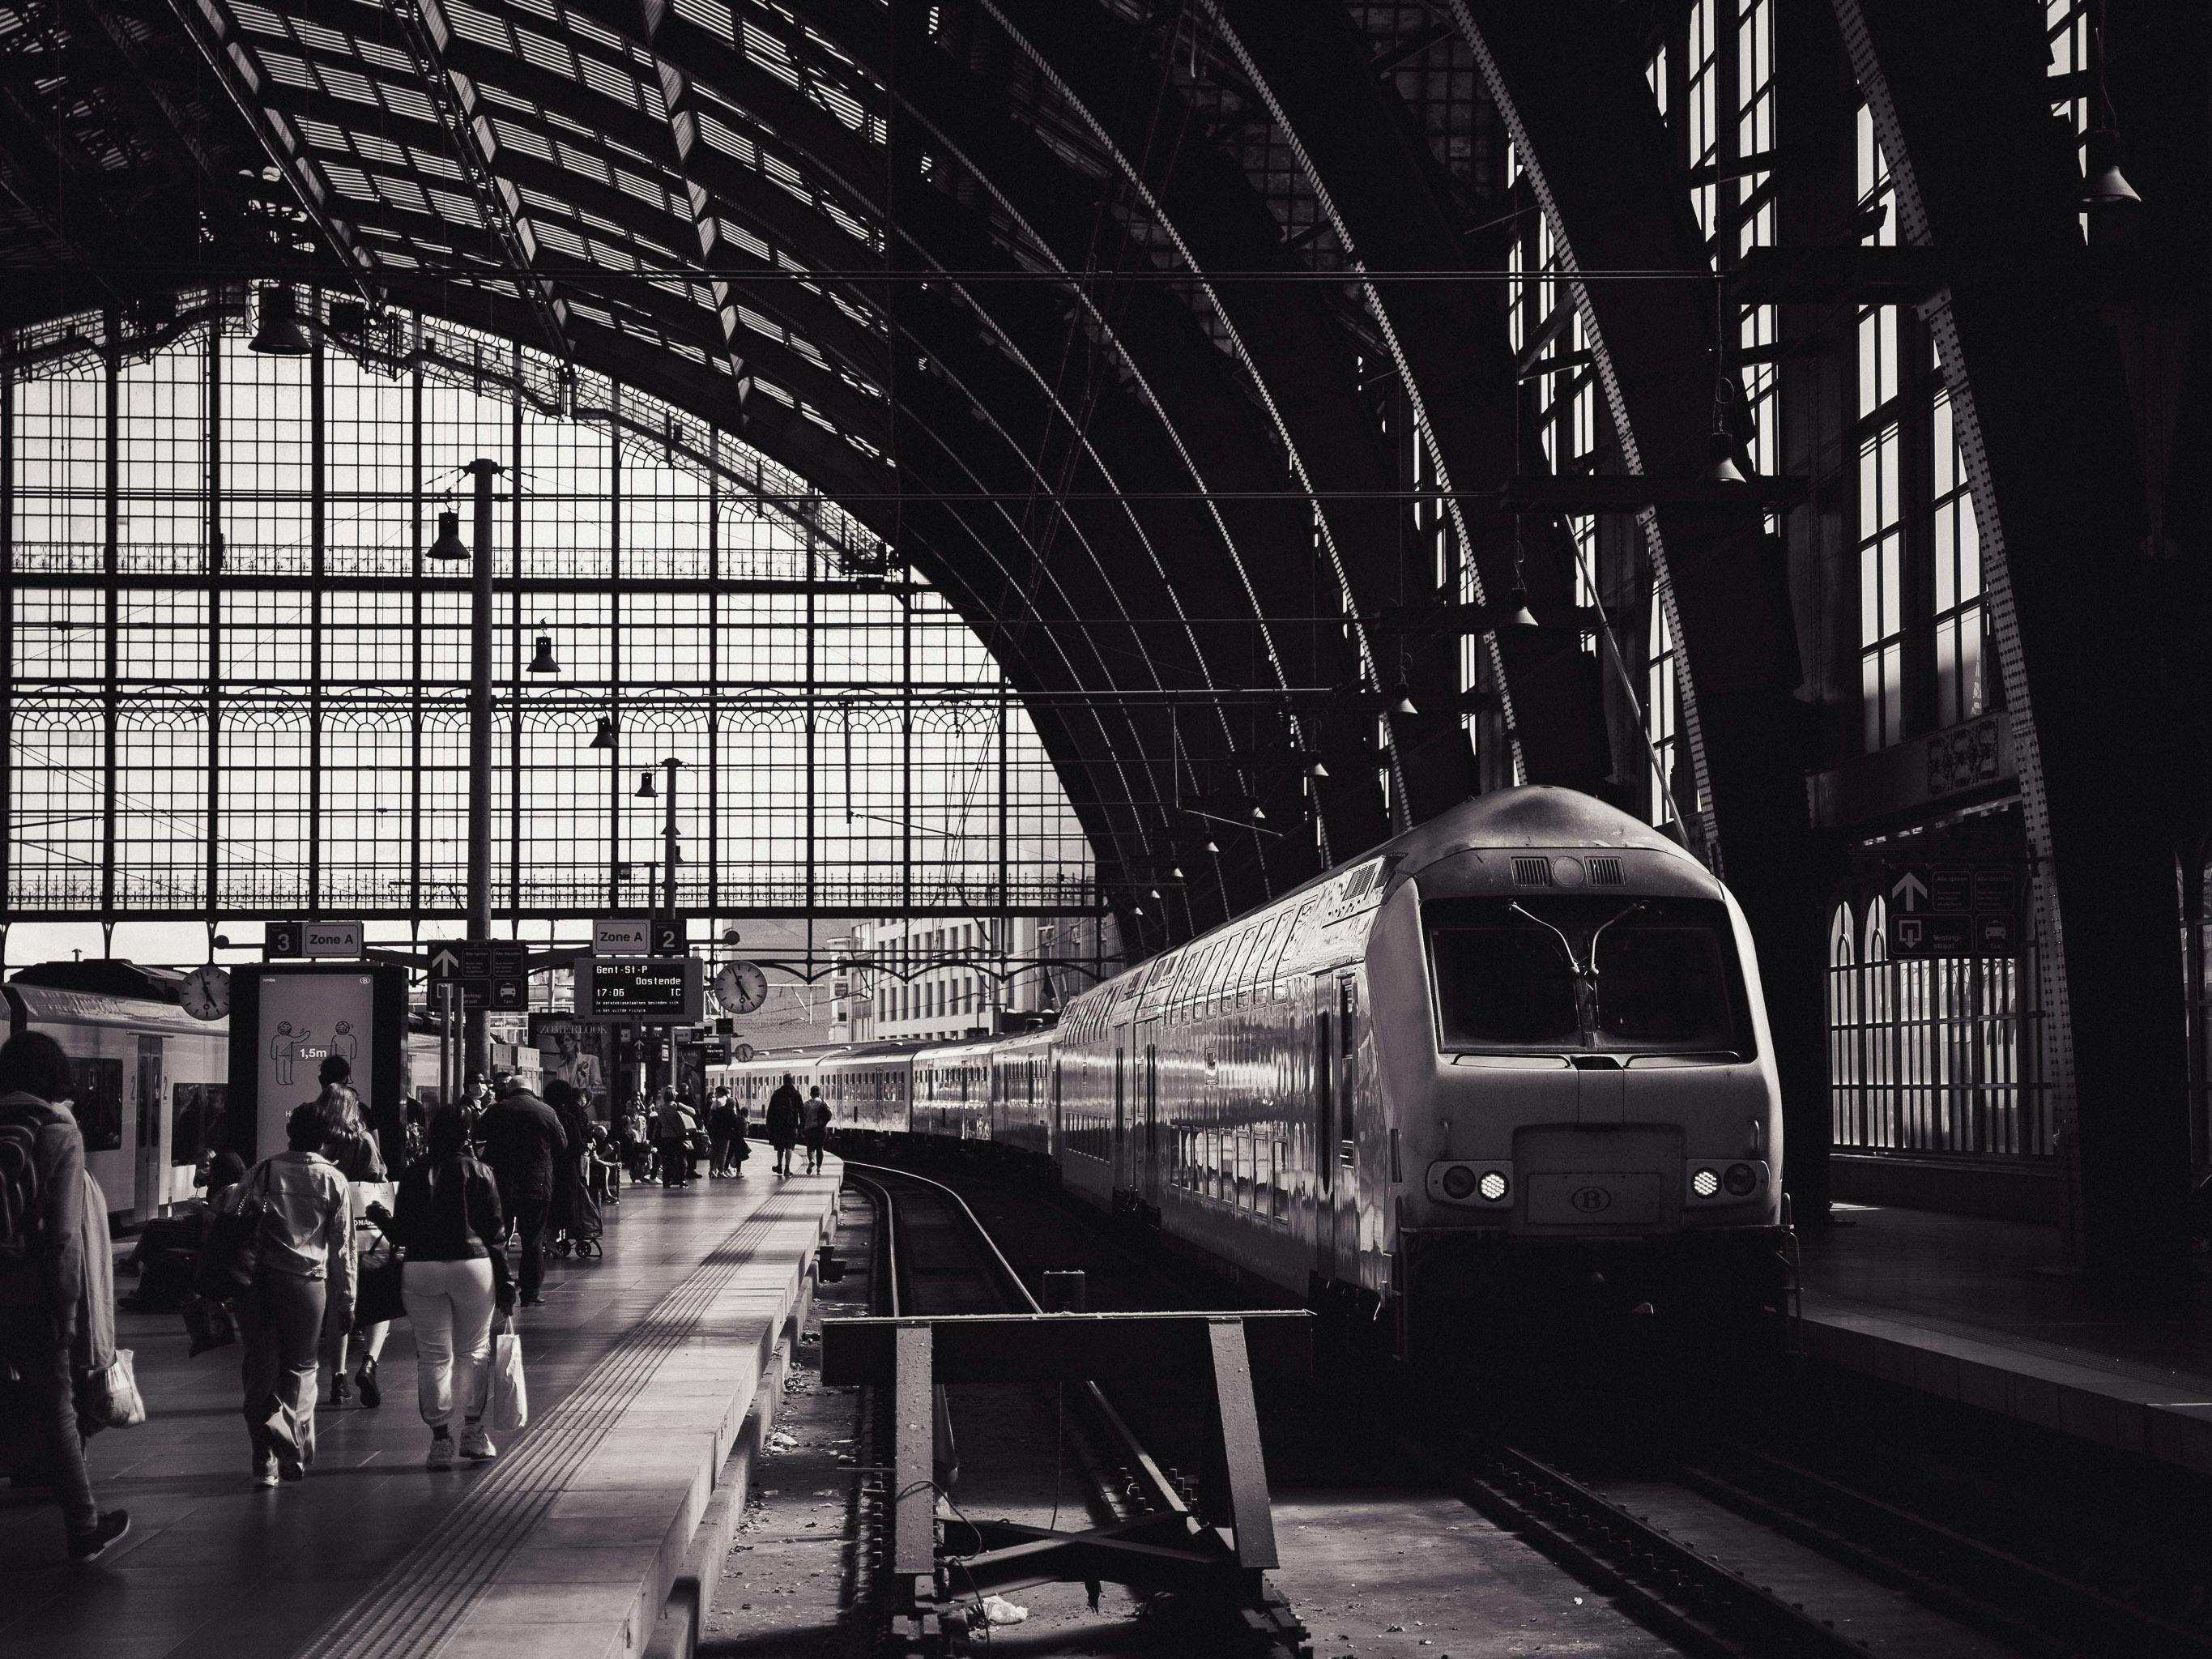 Train station wallpapers HD | Download Free backgrounds